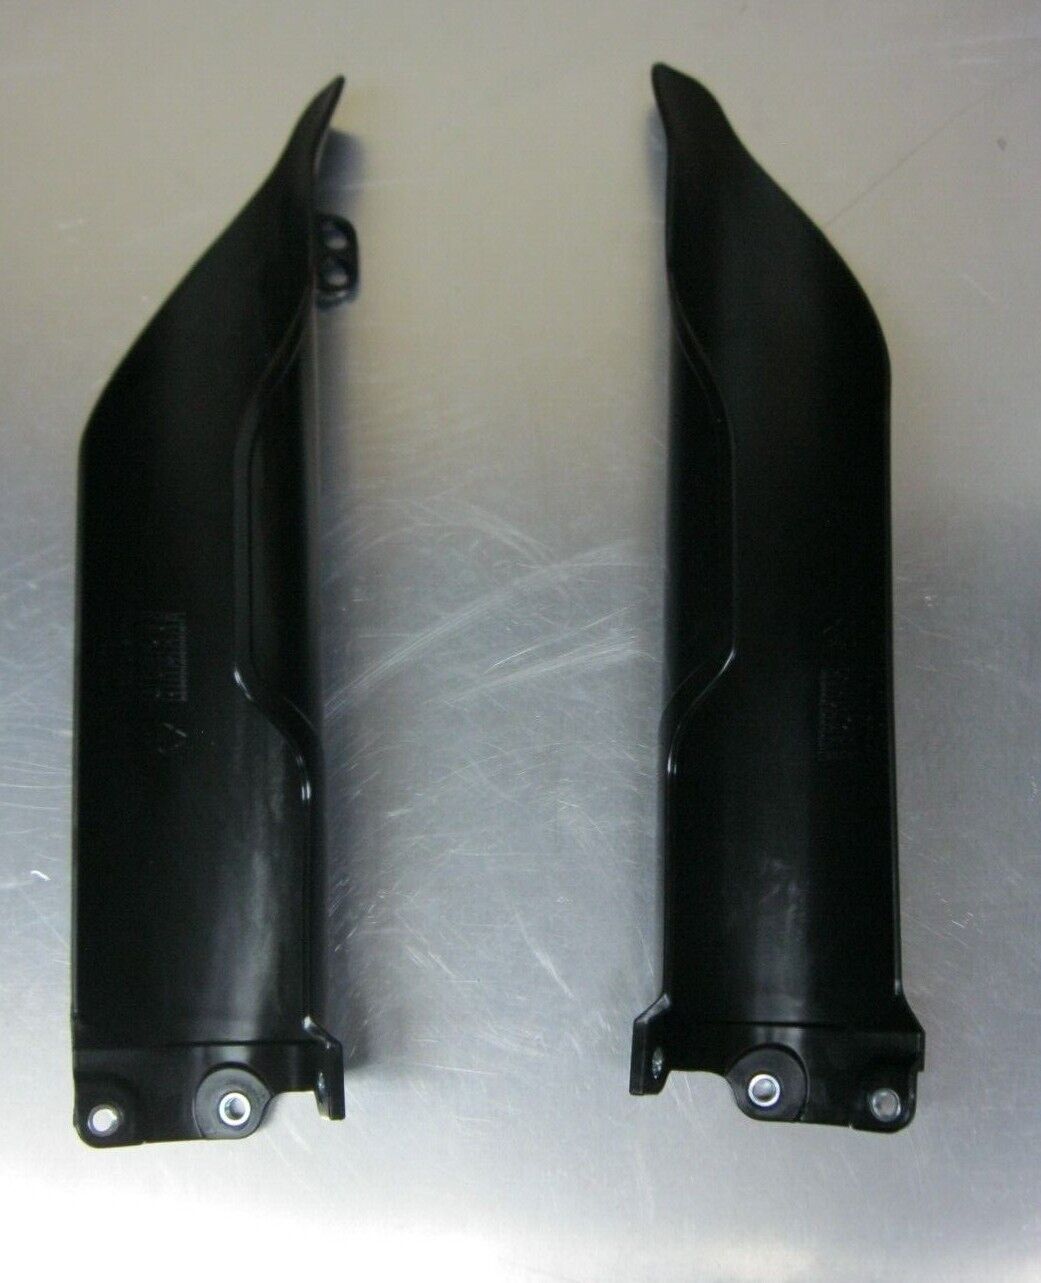 Acerbis Lower Fork Covers 0013140.090, 2141760001